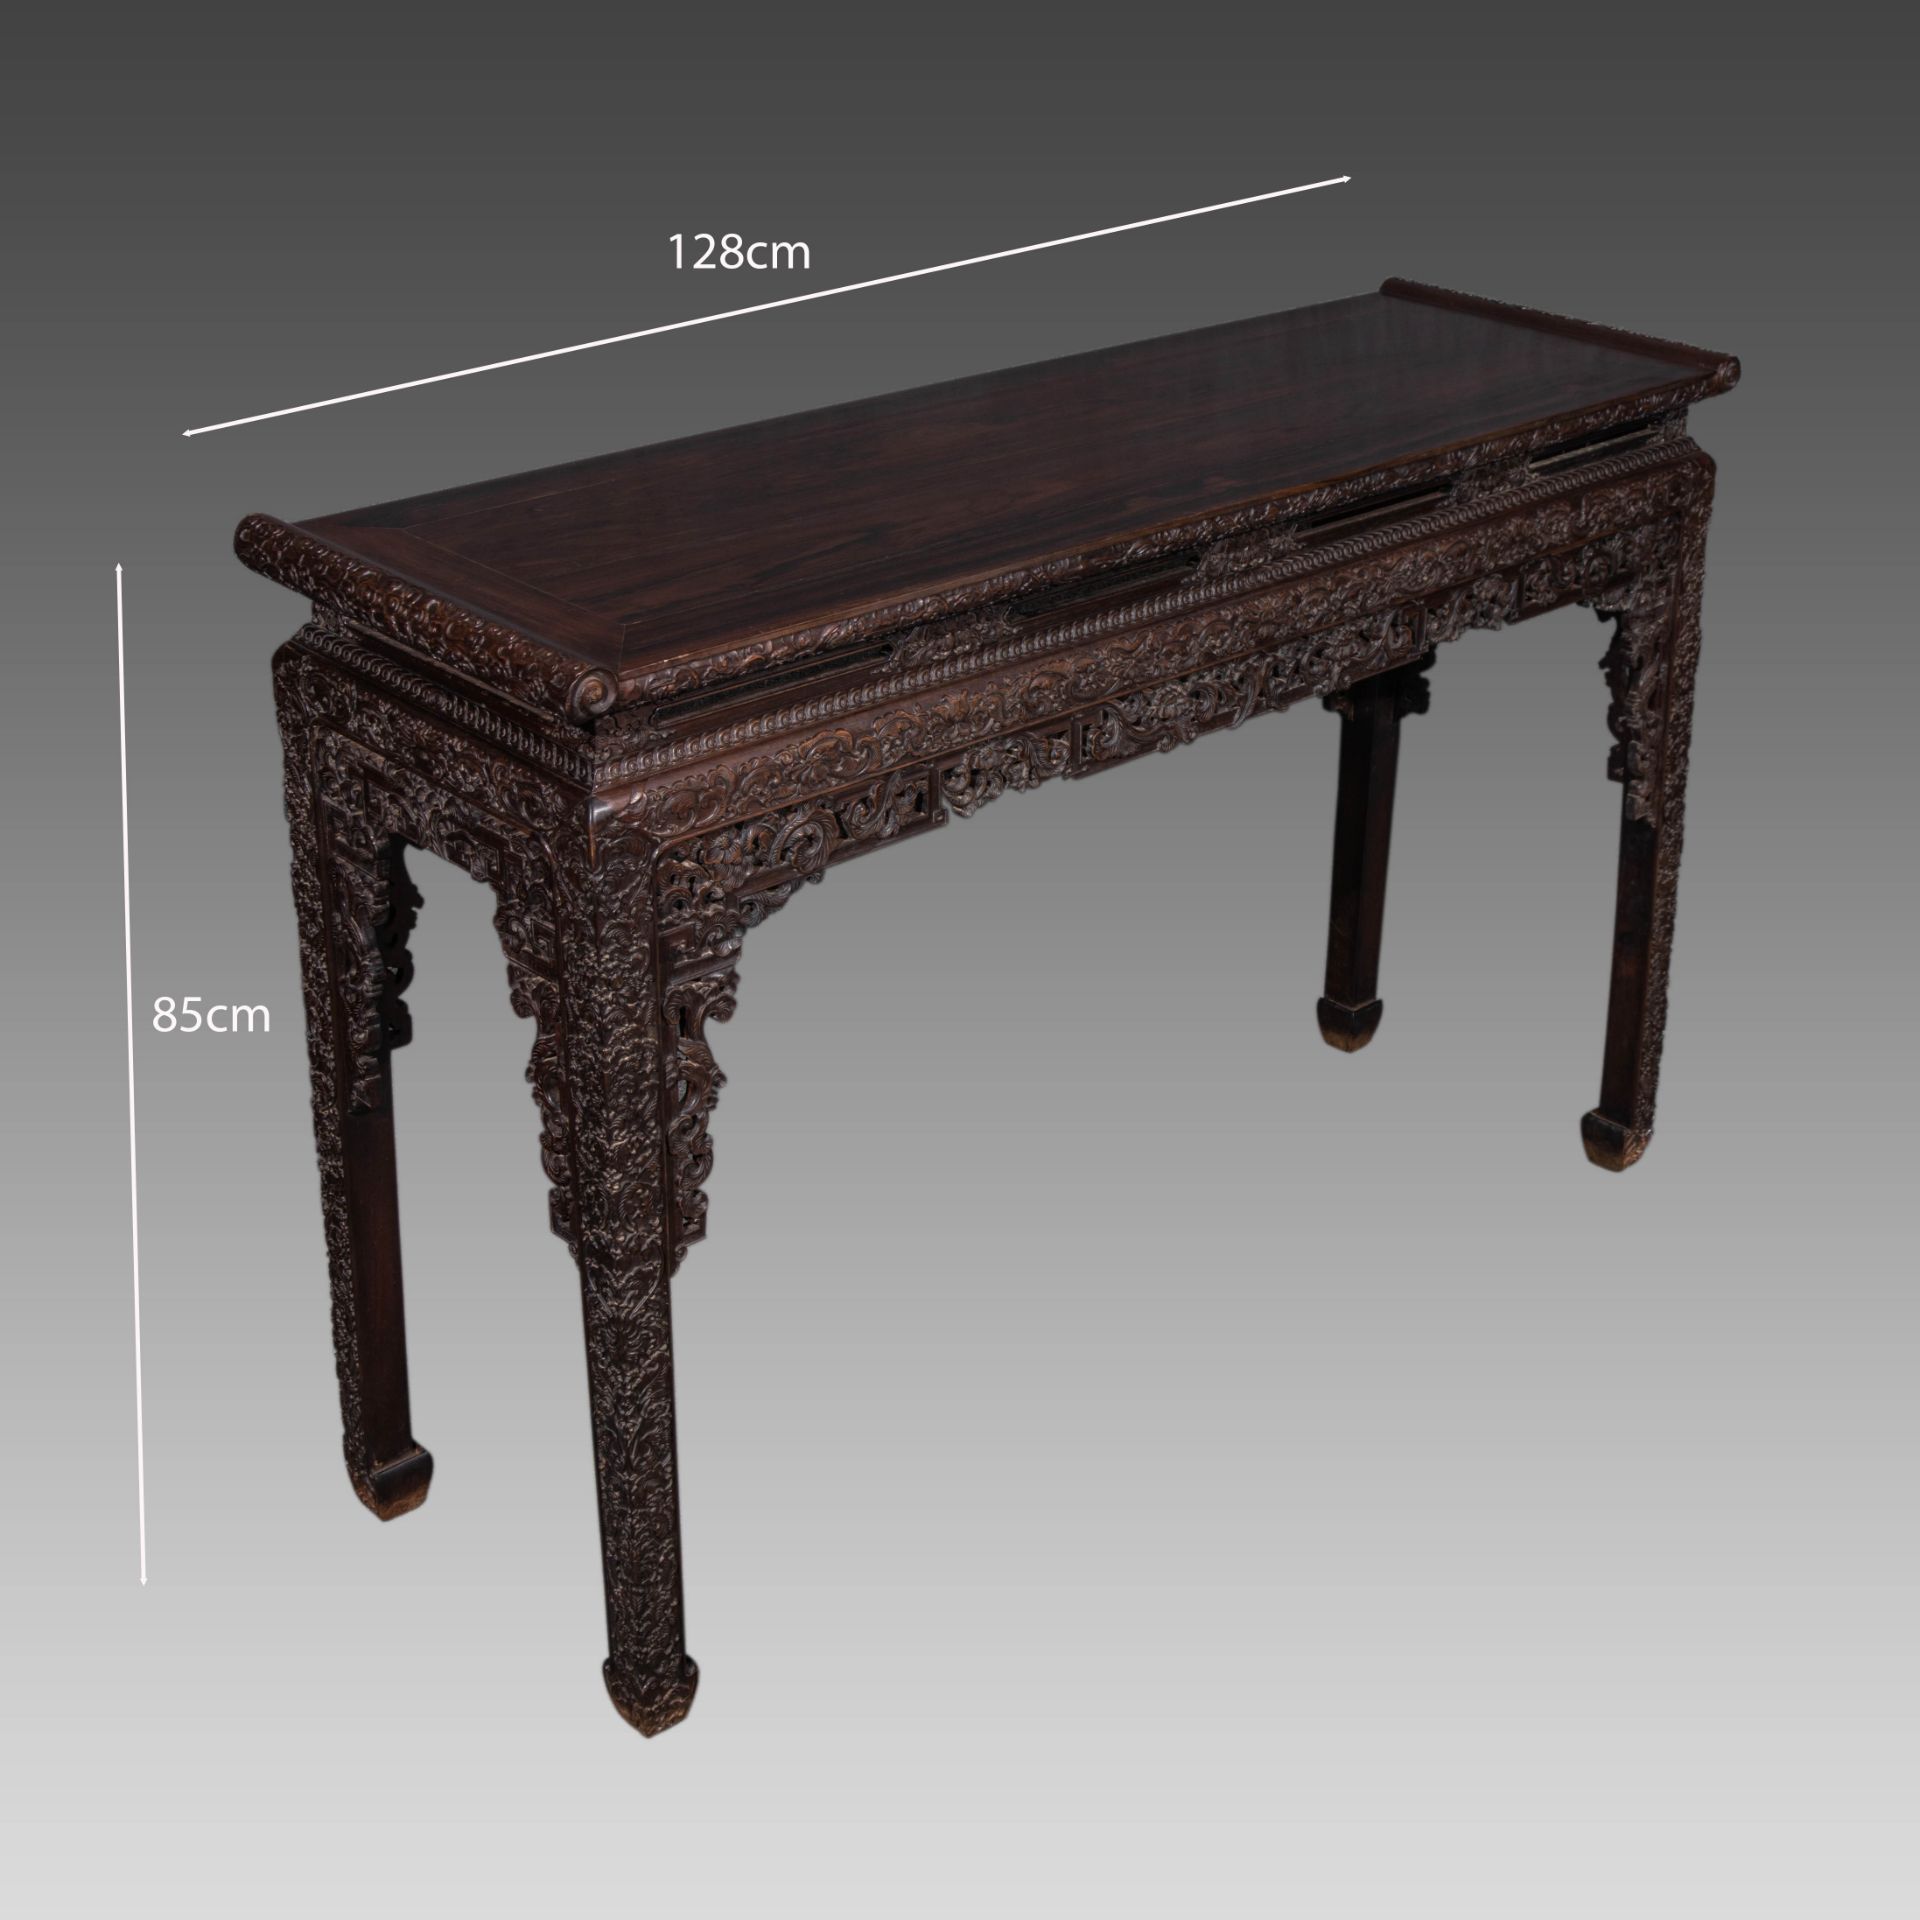 Chinese Qing Dynasty rosewood desk - Image 2 of 10